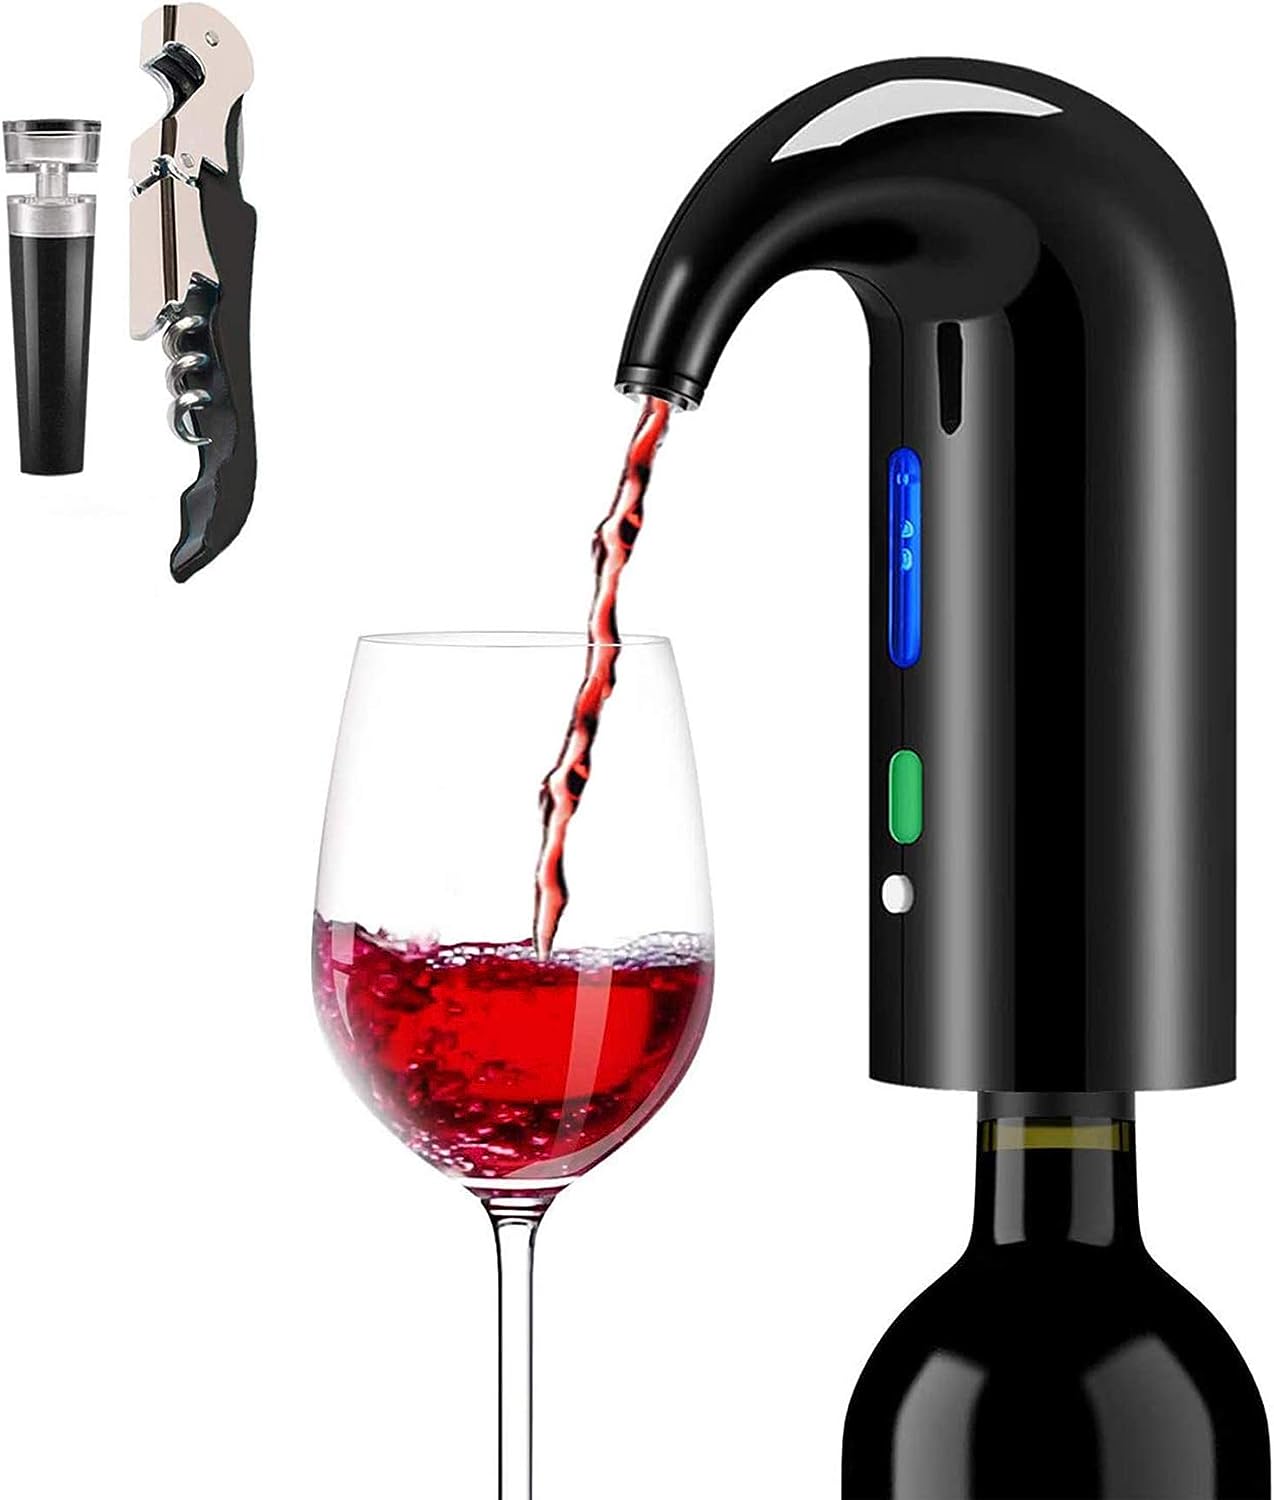 Electric Wine Aerator Gifts Electric Wine Pourer and Wine Dispenser Pump, Multi-Smart Automatic Filter Wine Dispenser with USB Rechargeable for Mother's Day Gifts, Travel, Home and Bar